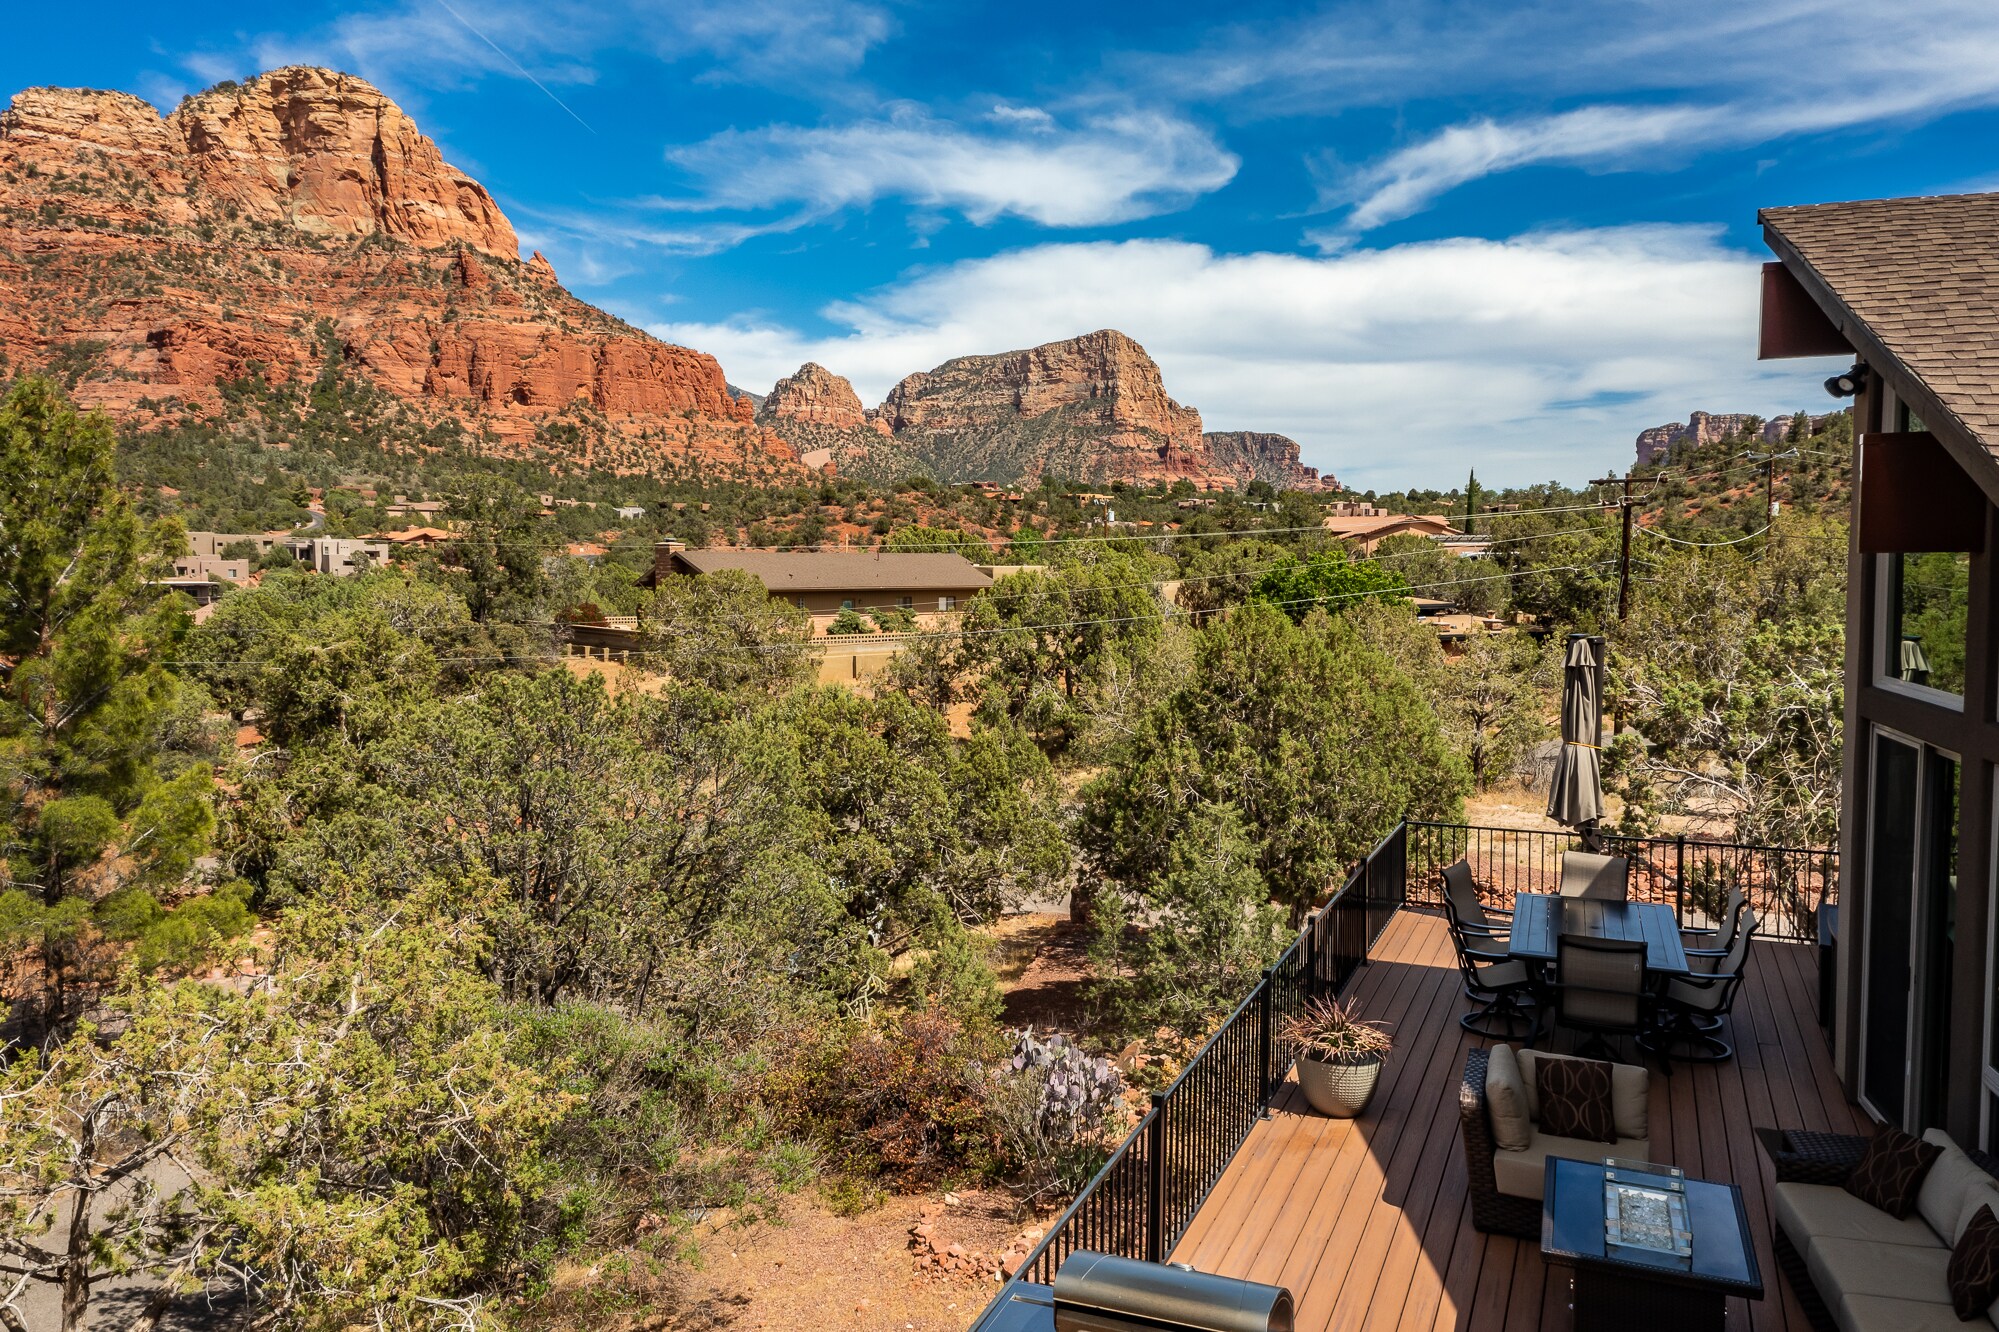 Natural Landscaping and Red Rock Backdrop